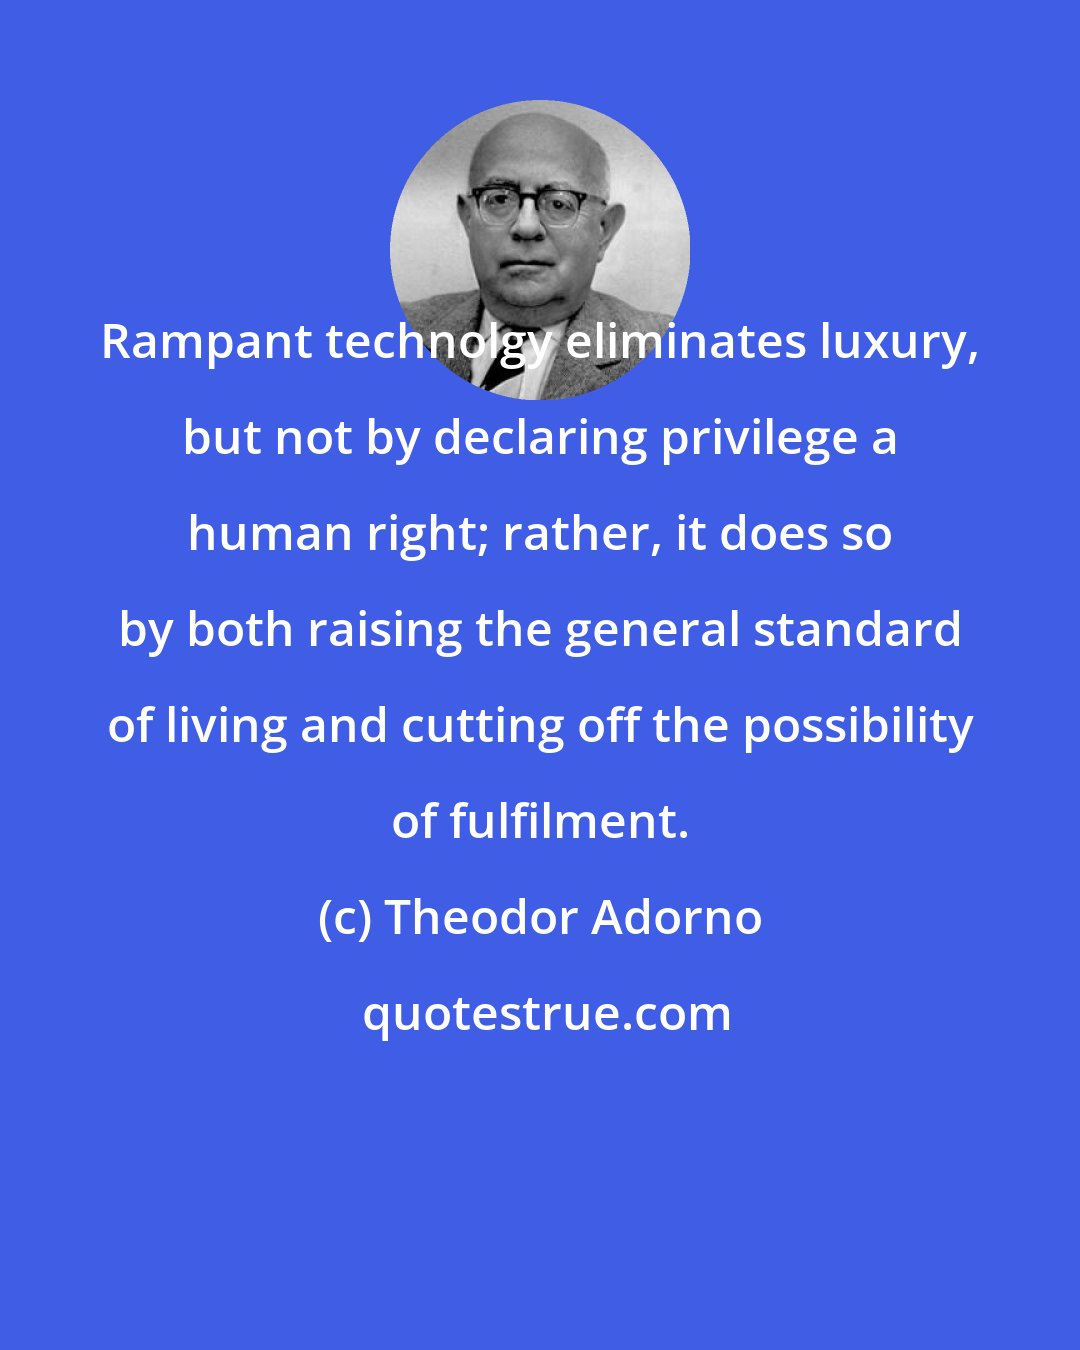 Theodor Adorno: Rampant technolgy eliminates luxury, but not by declaring privilege a human right; rather, it does so by both raising the general standard of living and cutting off the possibility of fulfilment.